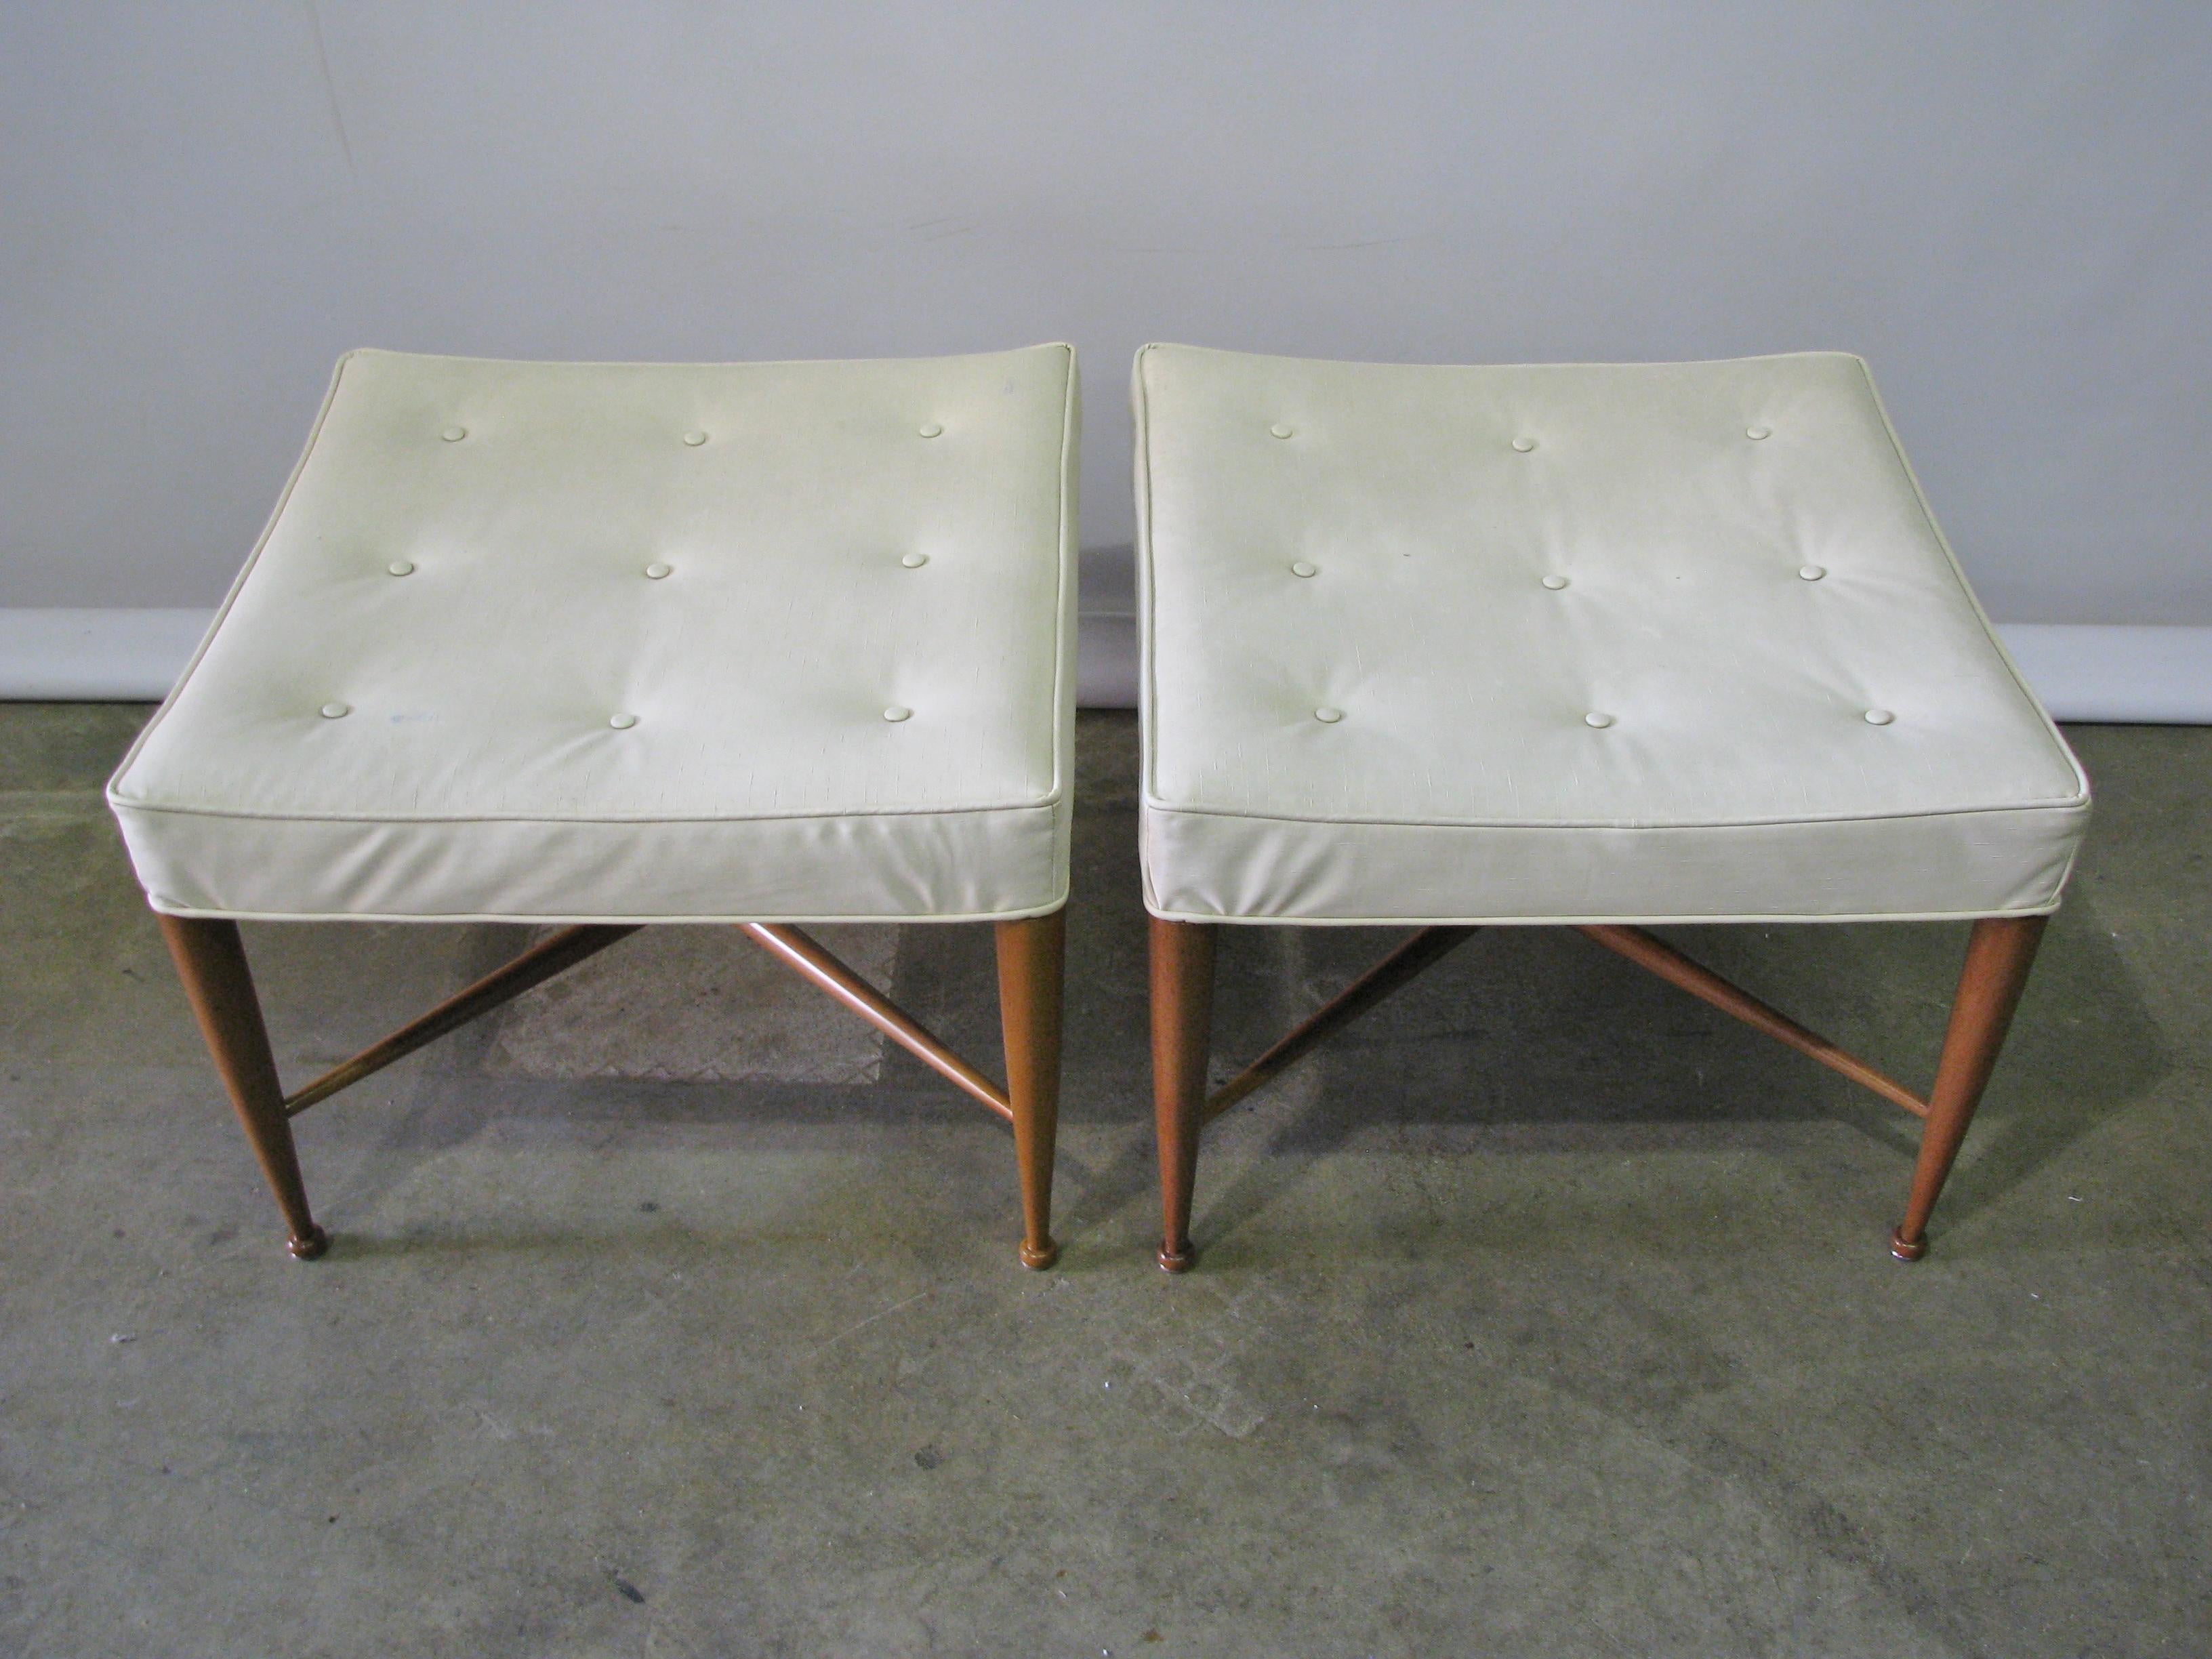 A pair of square upholstered benches each with a buttoned seat supported by walnut legs with button feet and X-stretchers. Model no. 5002. By Edward Wormley for Dunbar, American, circa 1950s. The pair has their original vinyl fabric (yes, vinyl!),